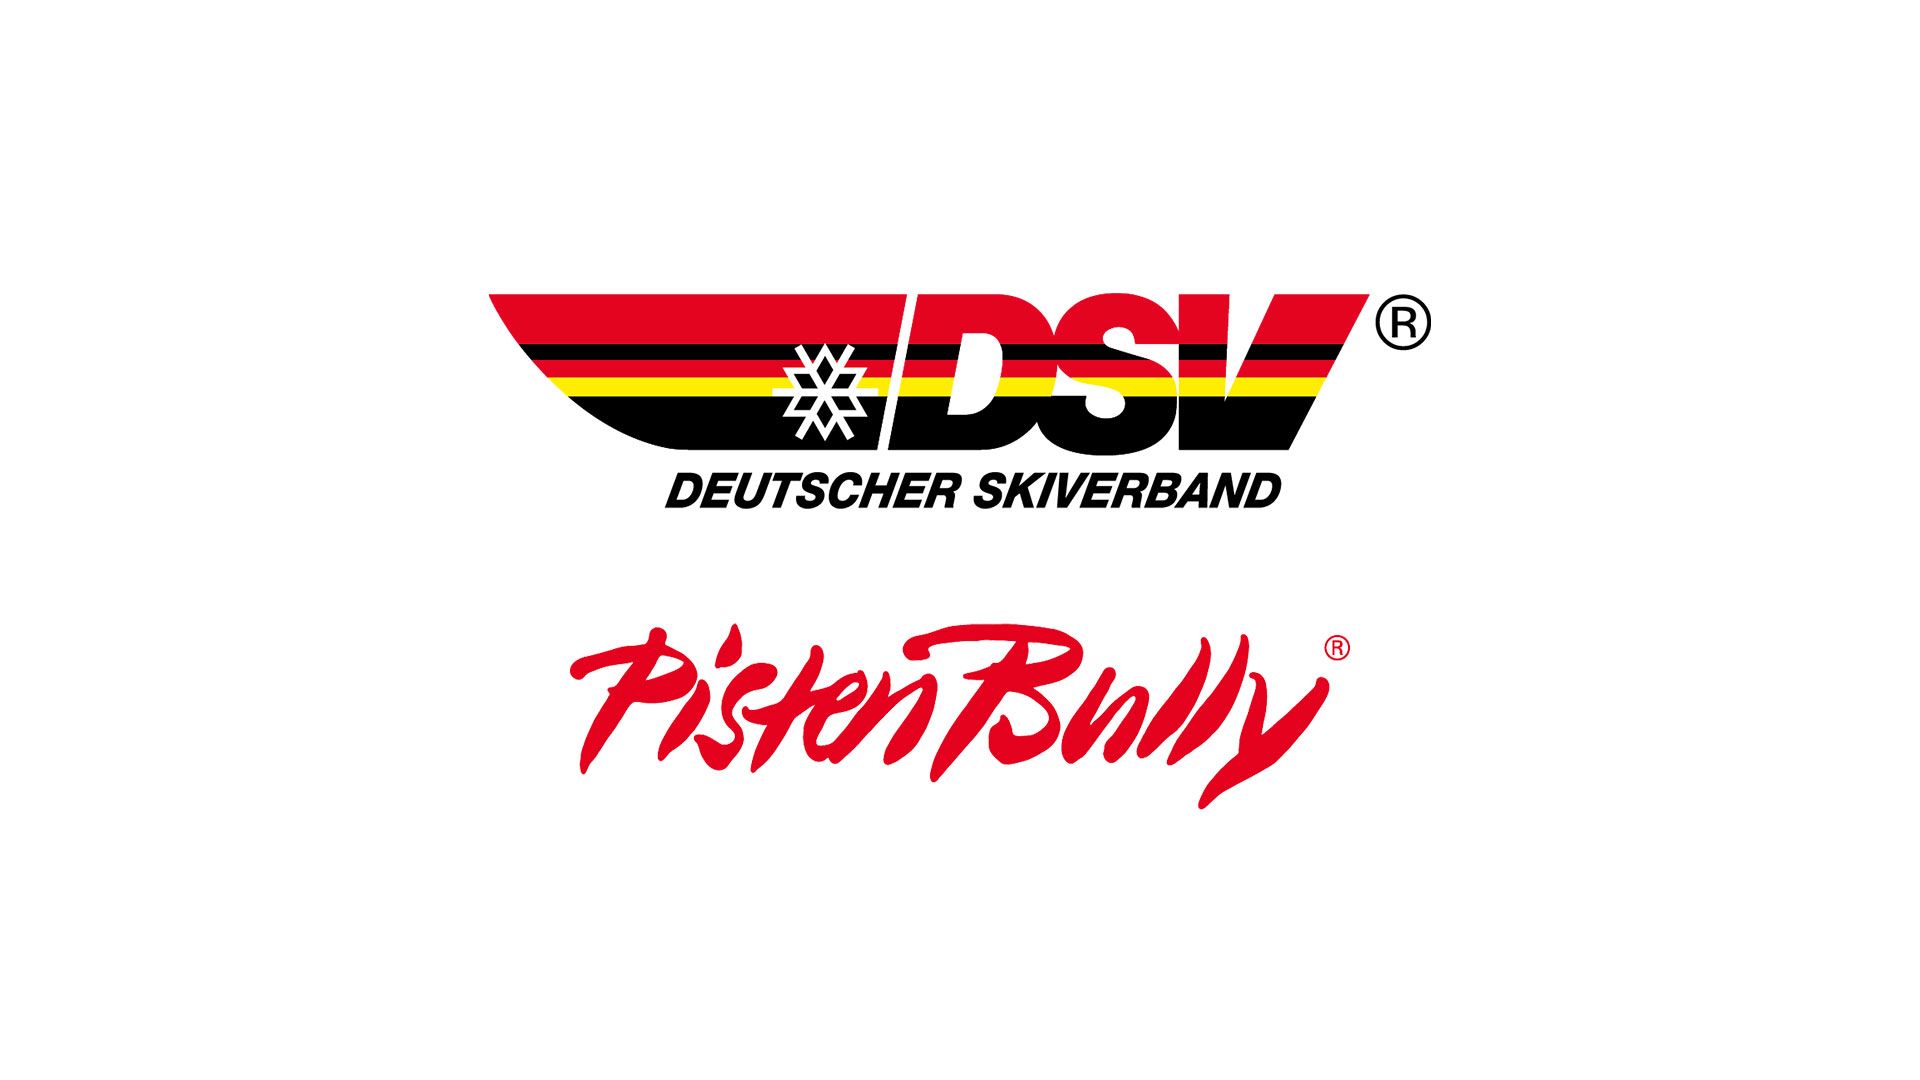 Future collaboration between Kässbohrer and the DSV will also include fostering young talent.